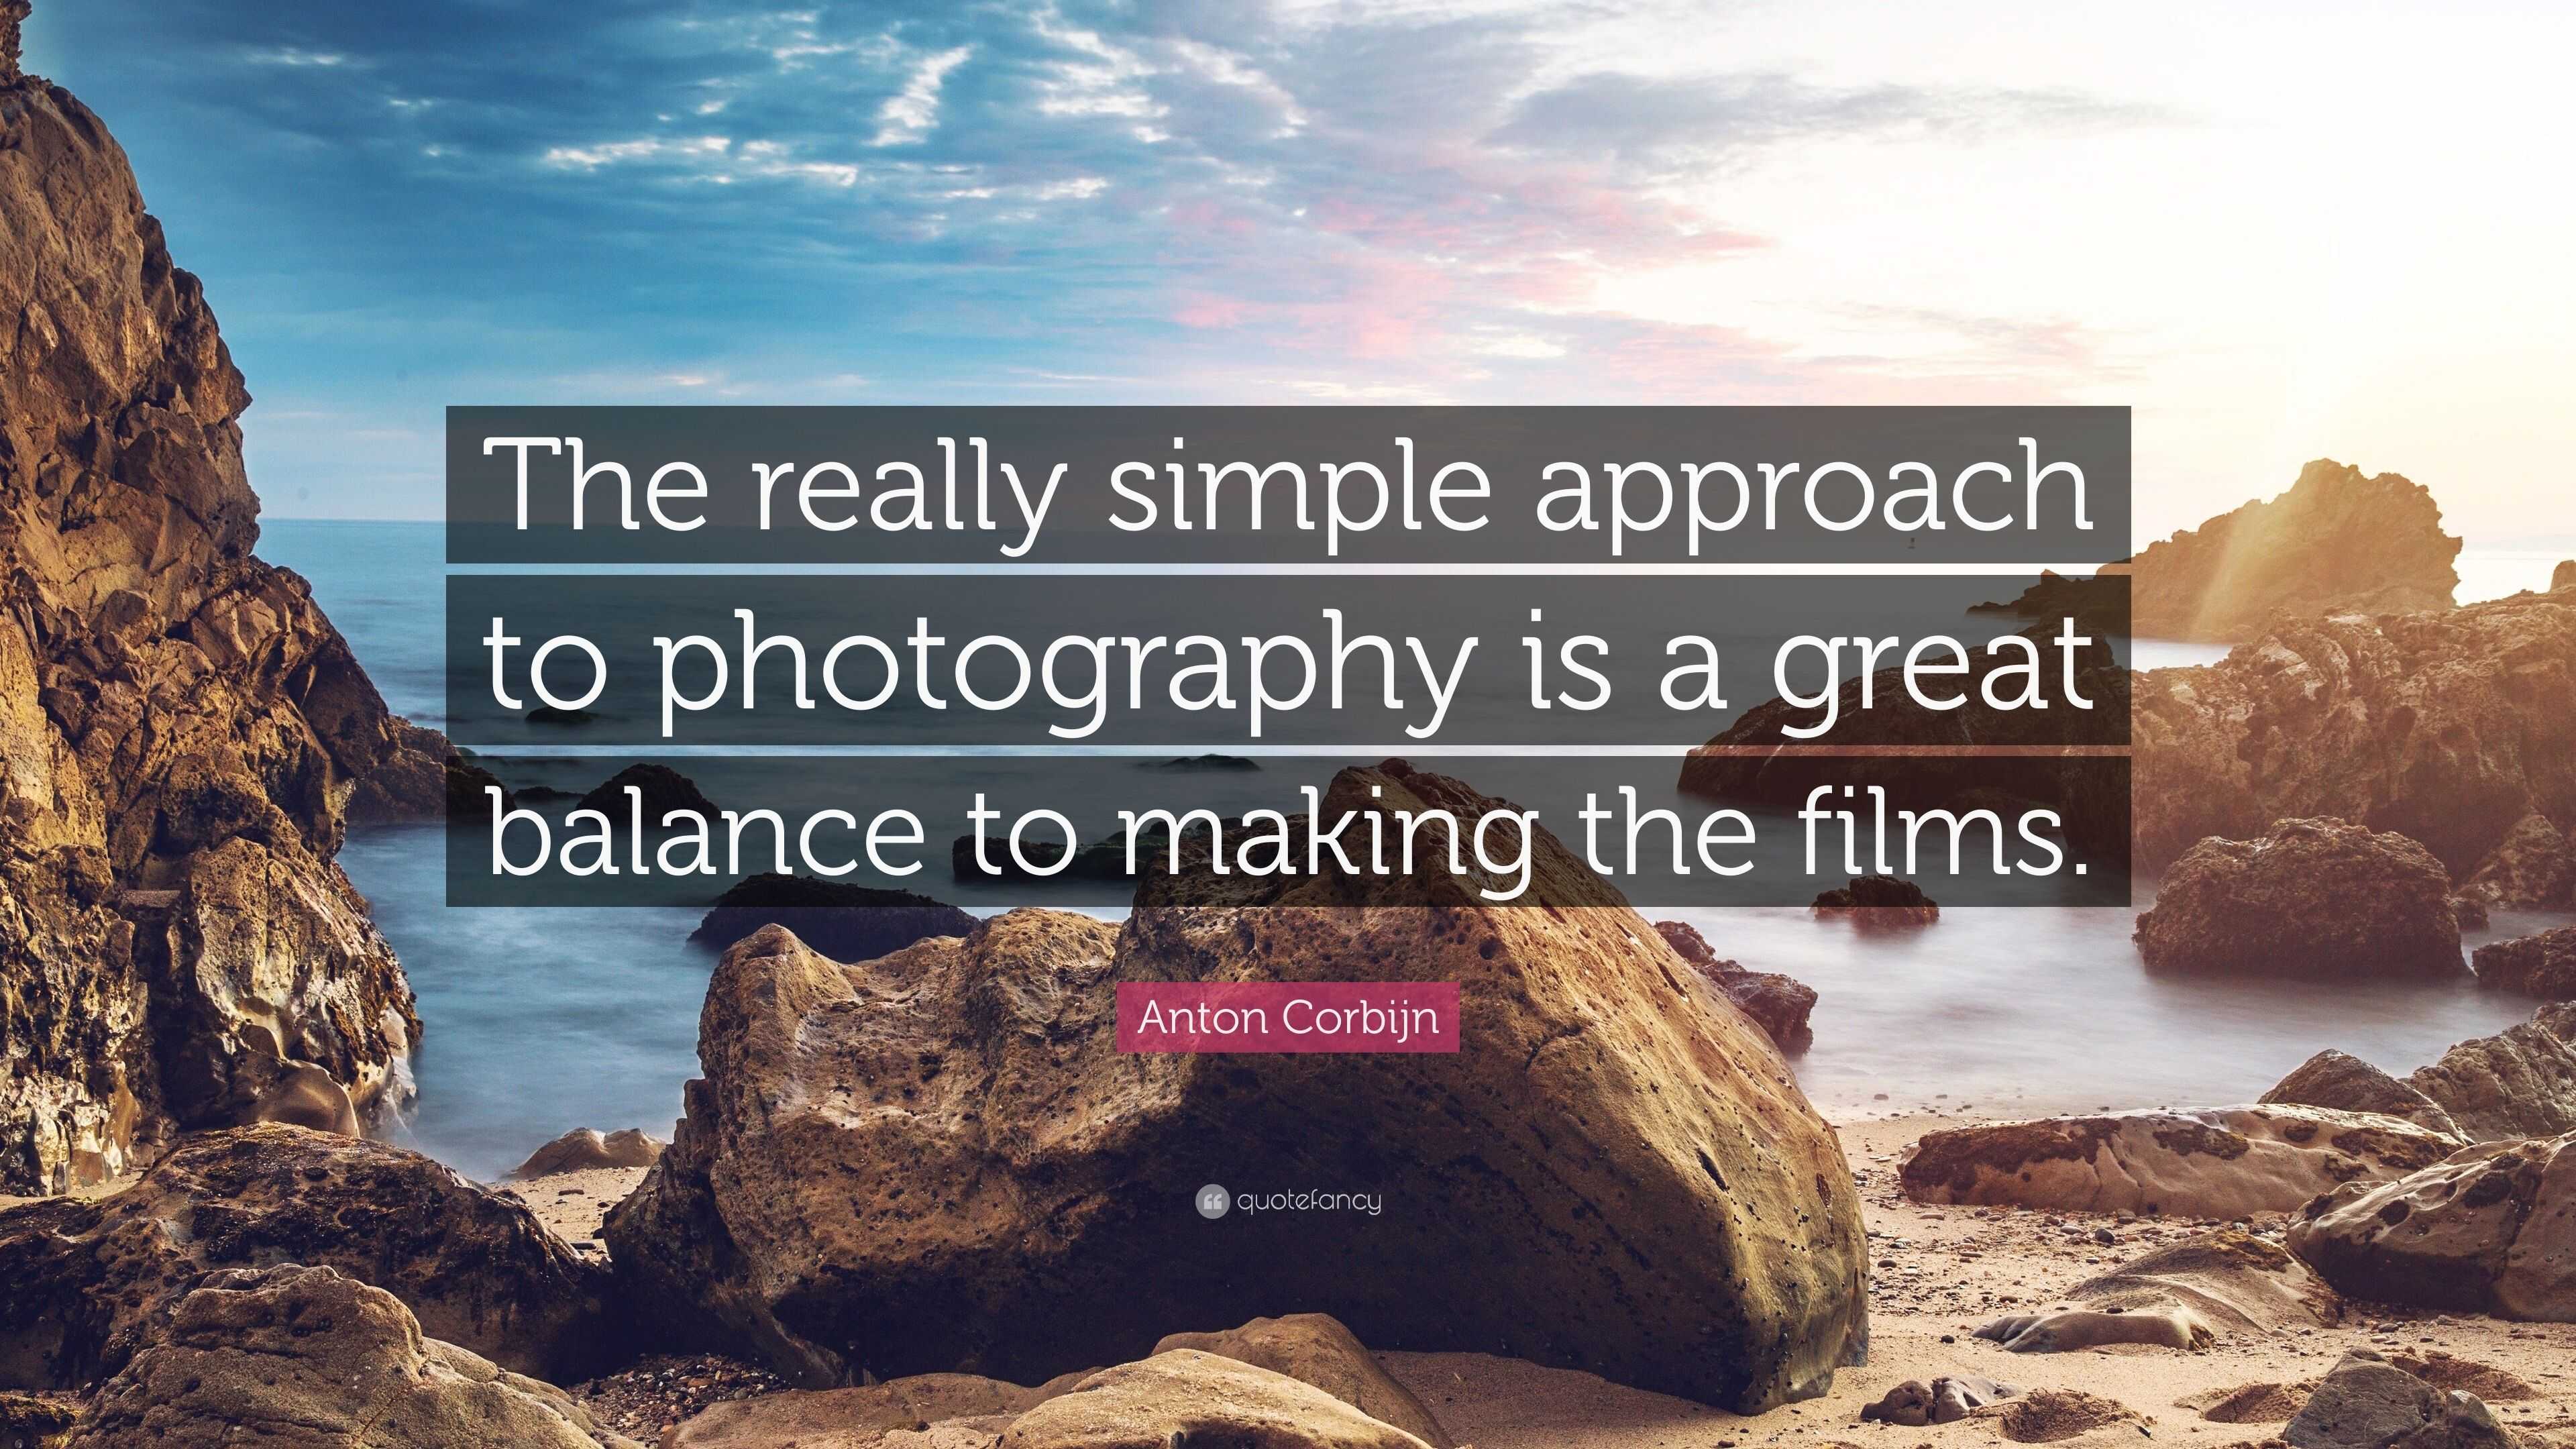 Anton Corbijn Quote: “The really simple approach to photography is a ...